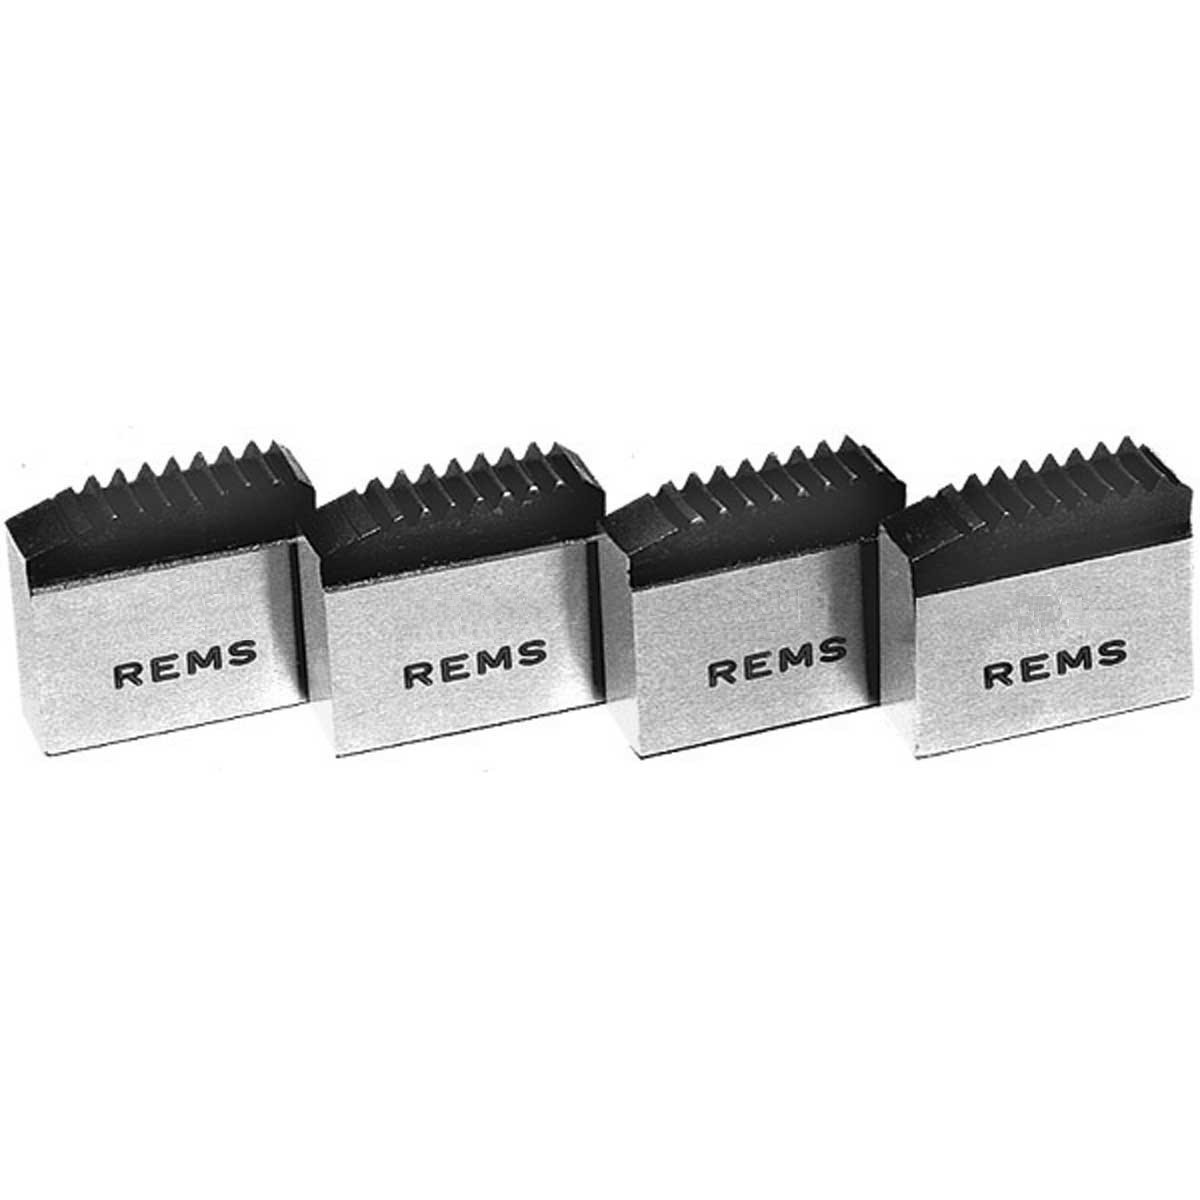 REMS - 1/4\" Replacement Die Set, 521212